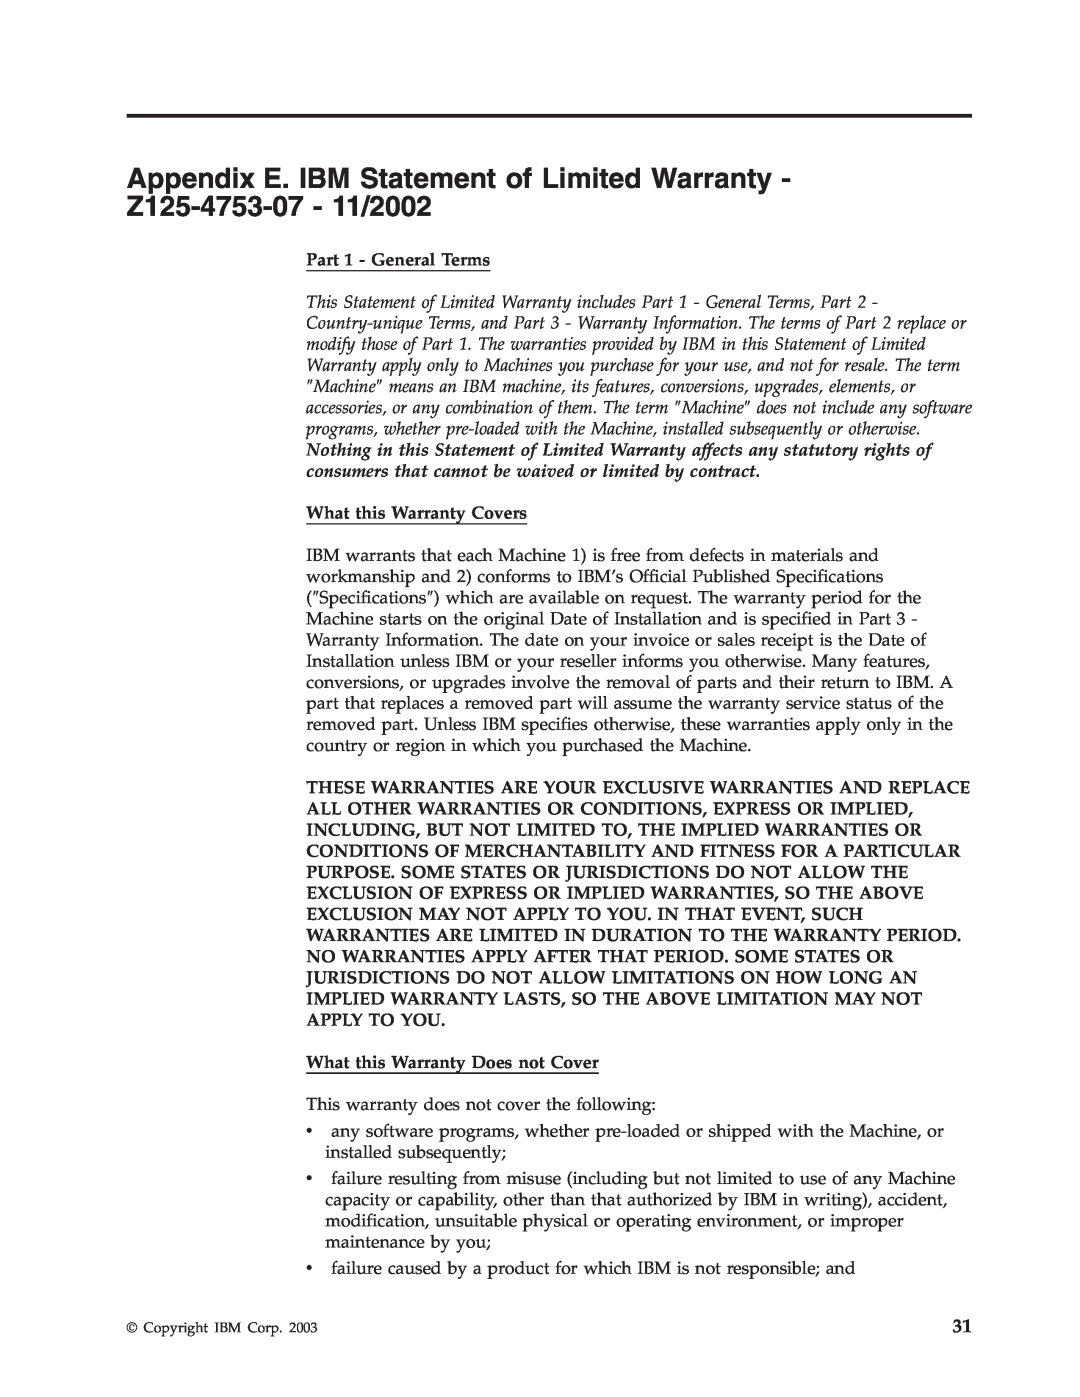 Trust Computer Products IBM 802.11a/b/g Wireless CardBus Adapter manual Part 1 - General Terms, What this Warranty Covers 